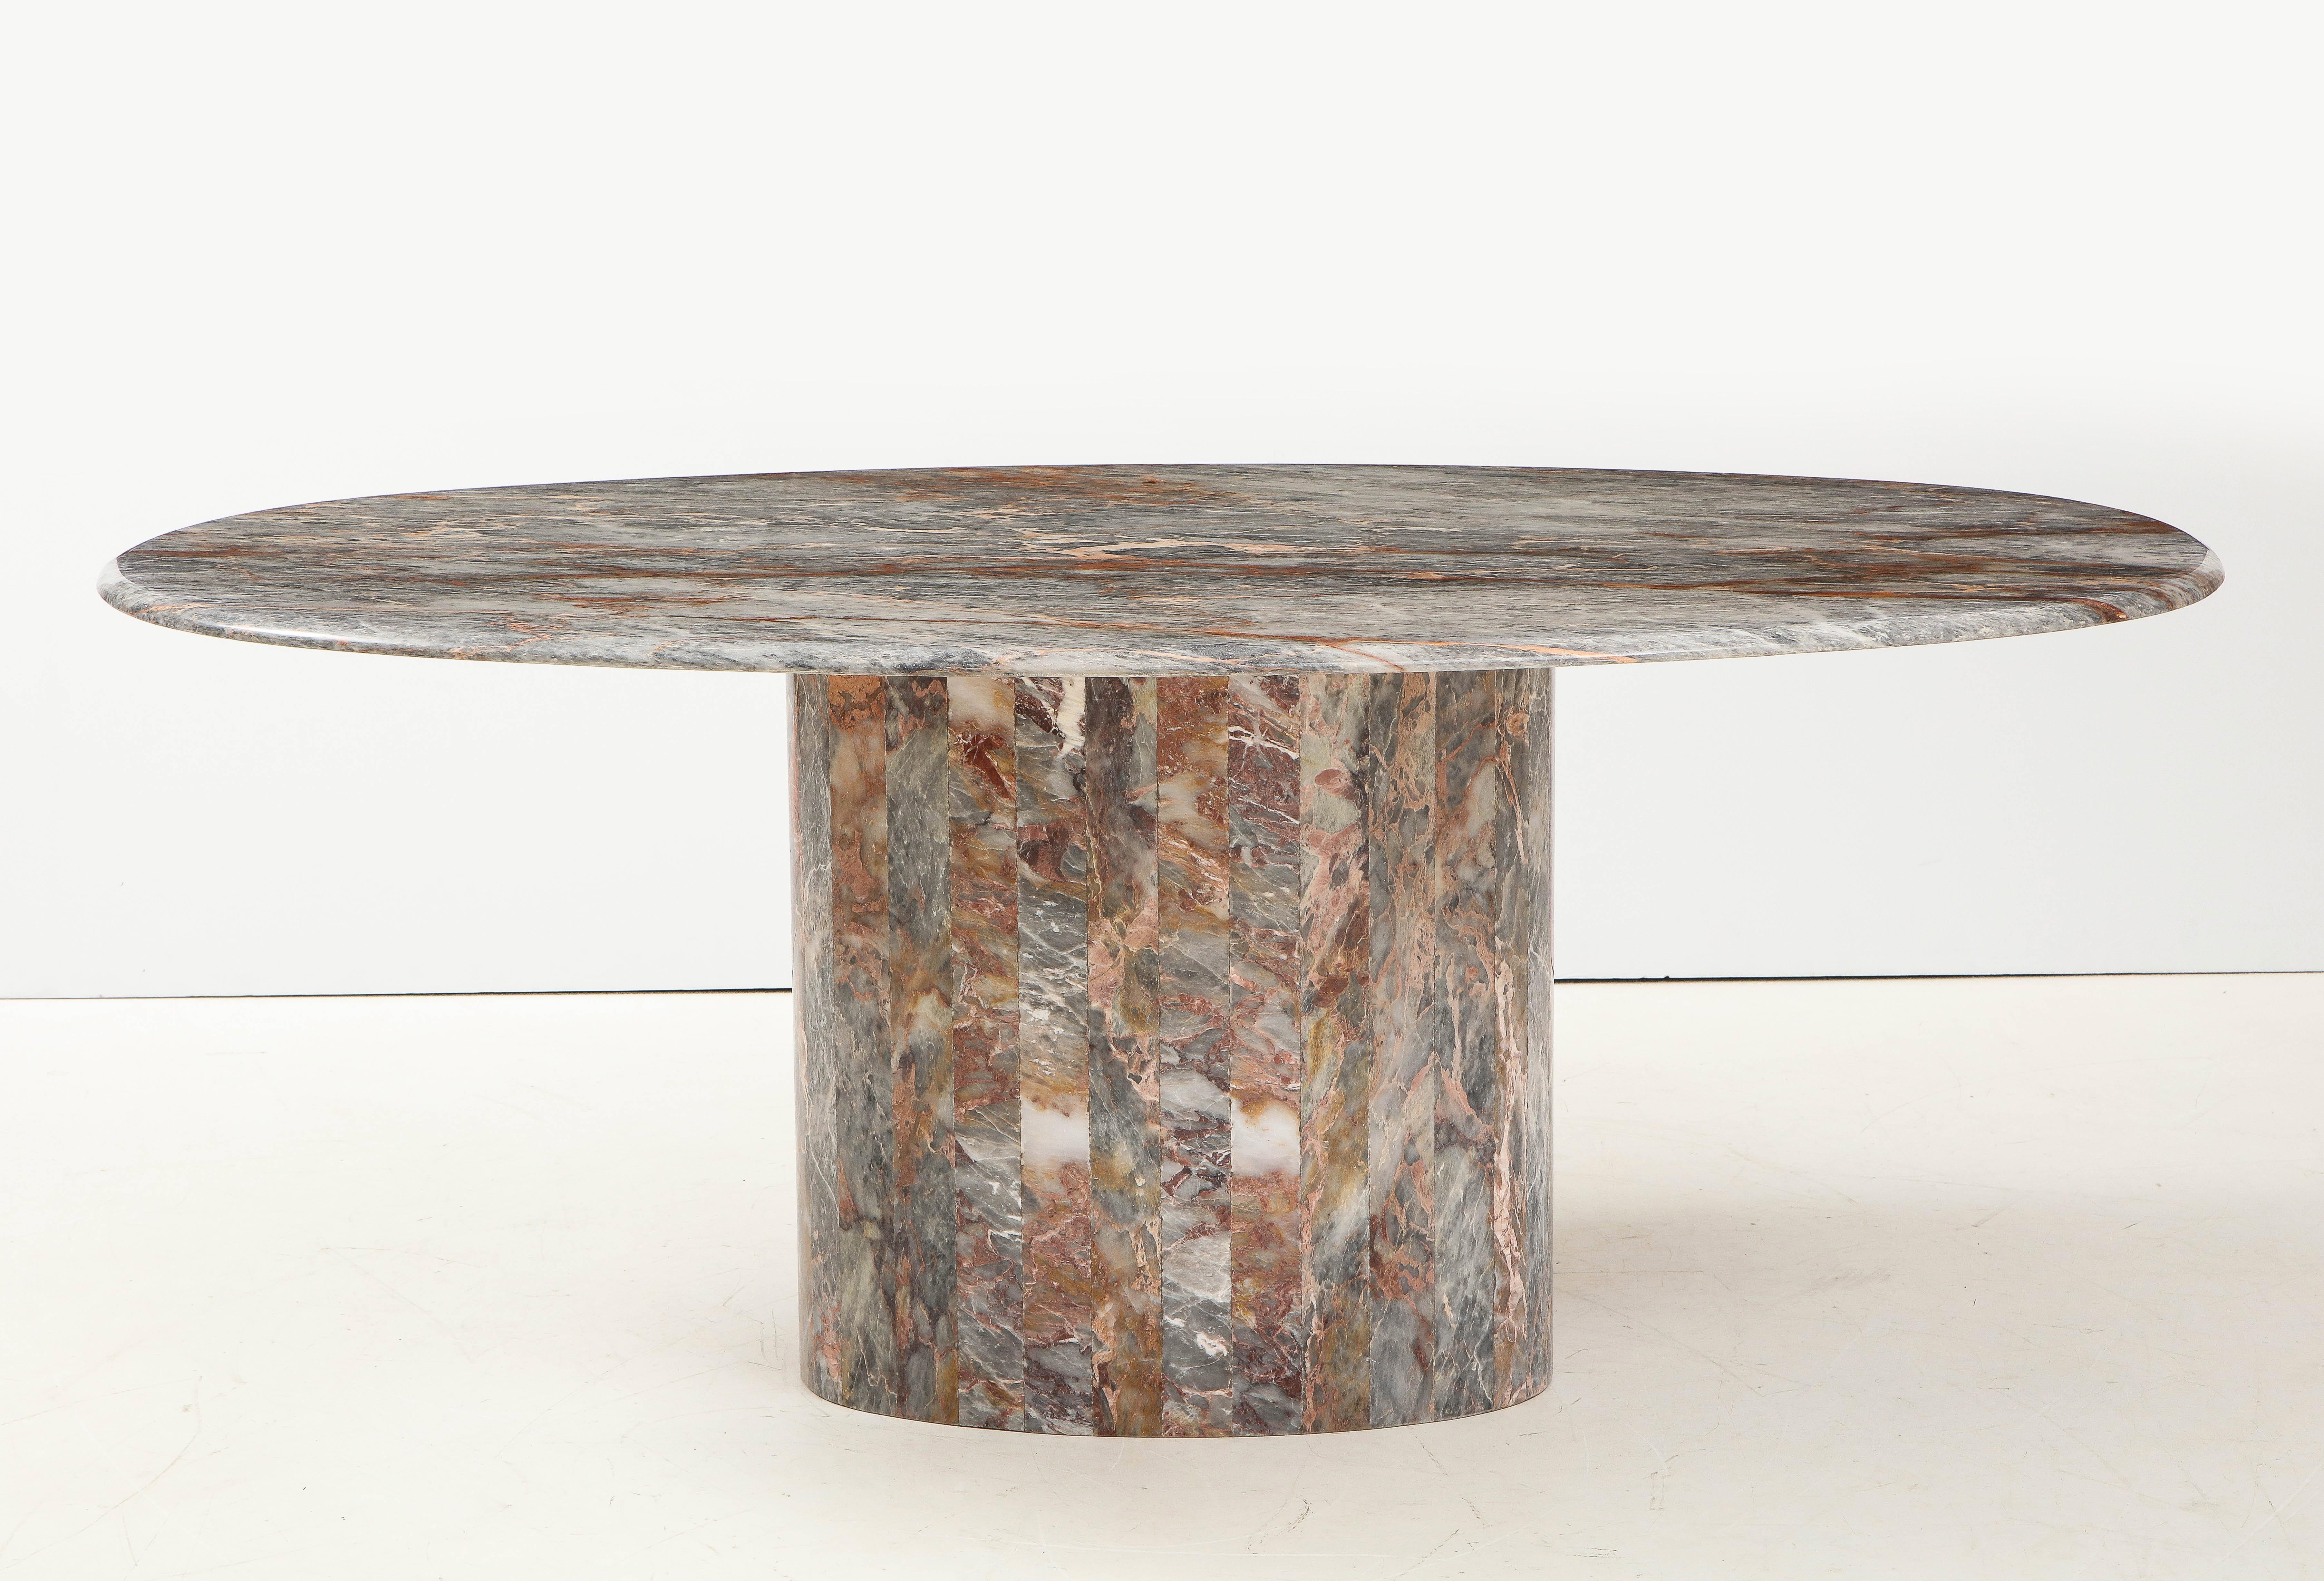 Stunning 1970's Mid-Century Modern exotic marble Italian oval dining table, In vintage original condition, with minor wear and patina due to age and use.